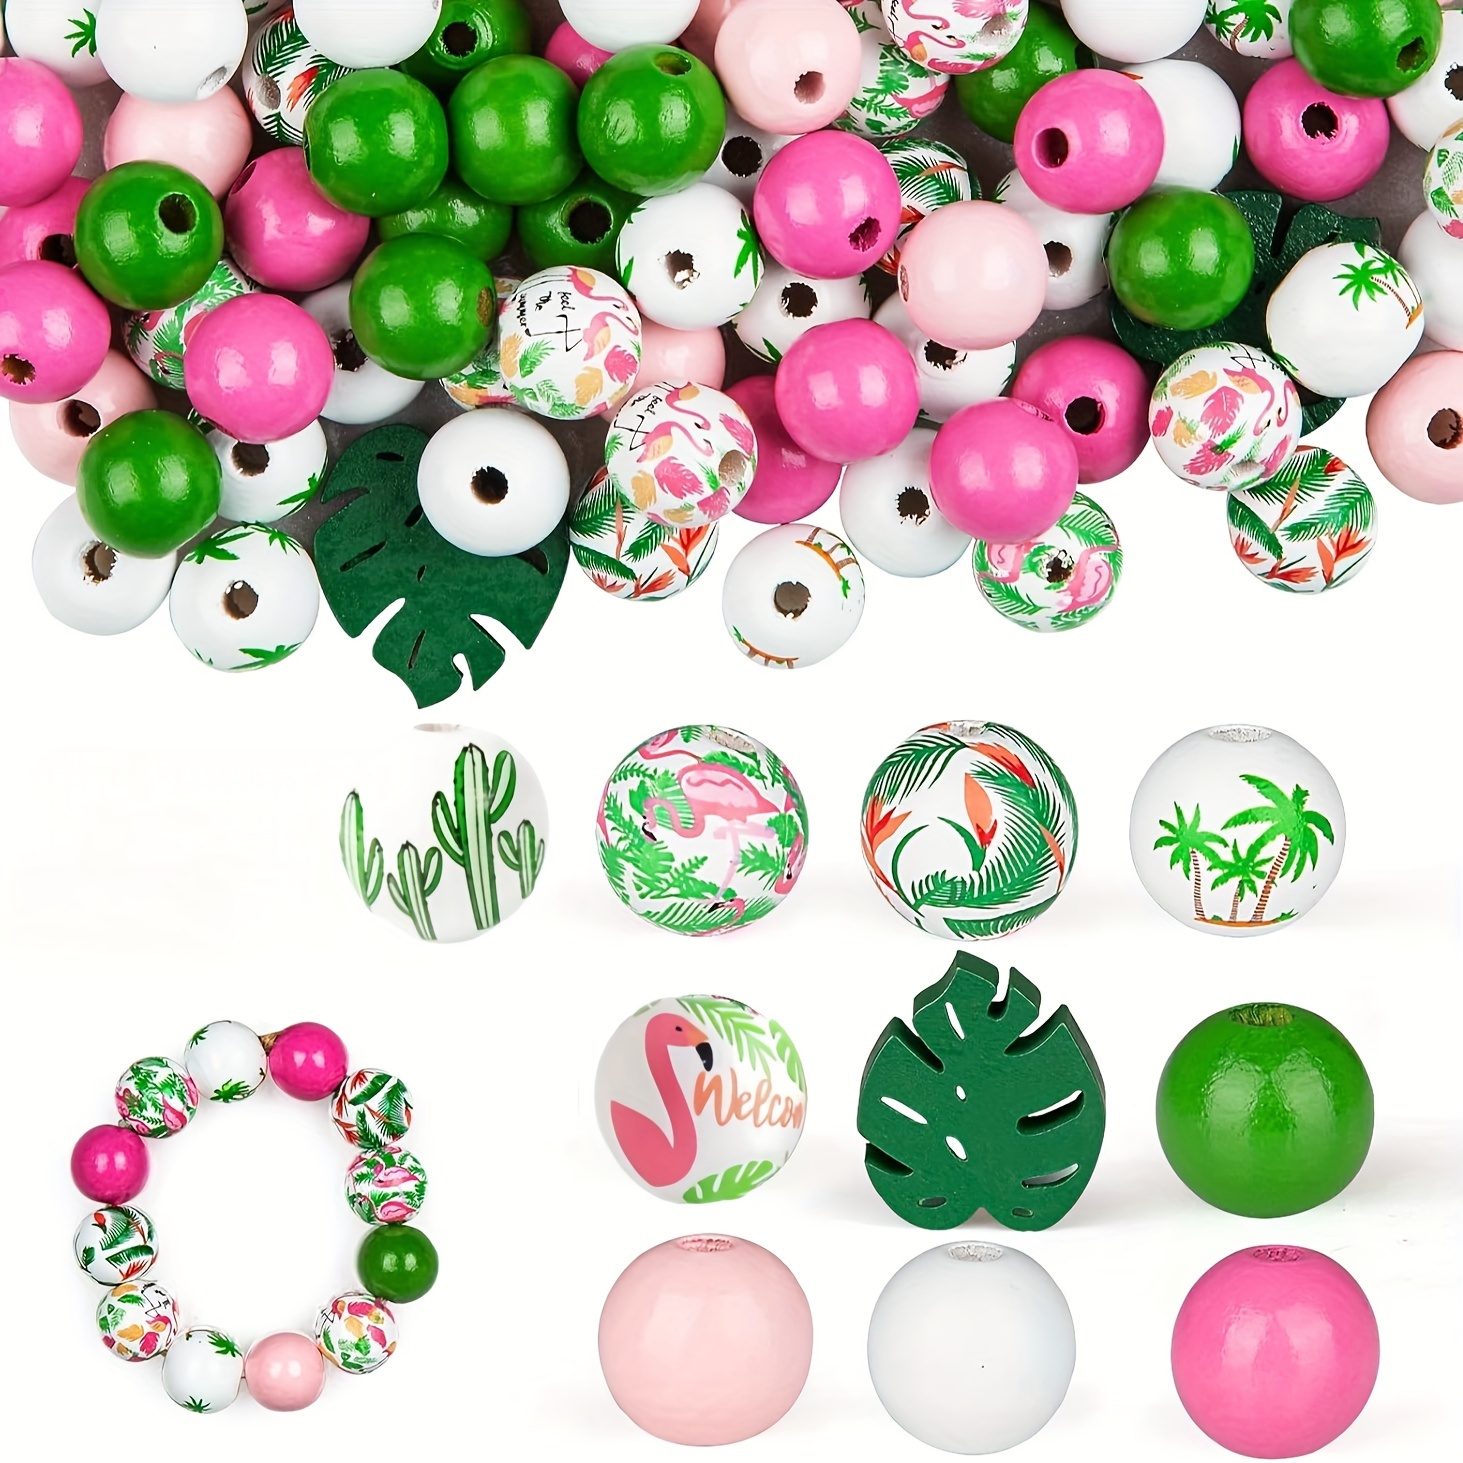 

52-piece Tropical Flamingo & Cactus Themed Wooden Beads Set, 16mm - Colorful Diy Jewelry Making Kit For Keychains, Pens, And Home Decor Crafts